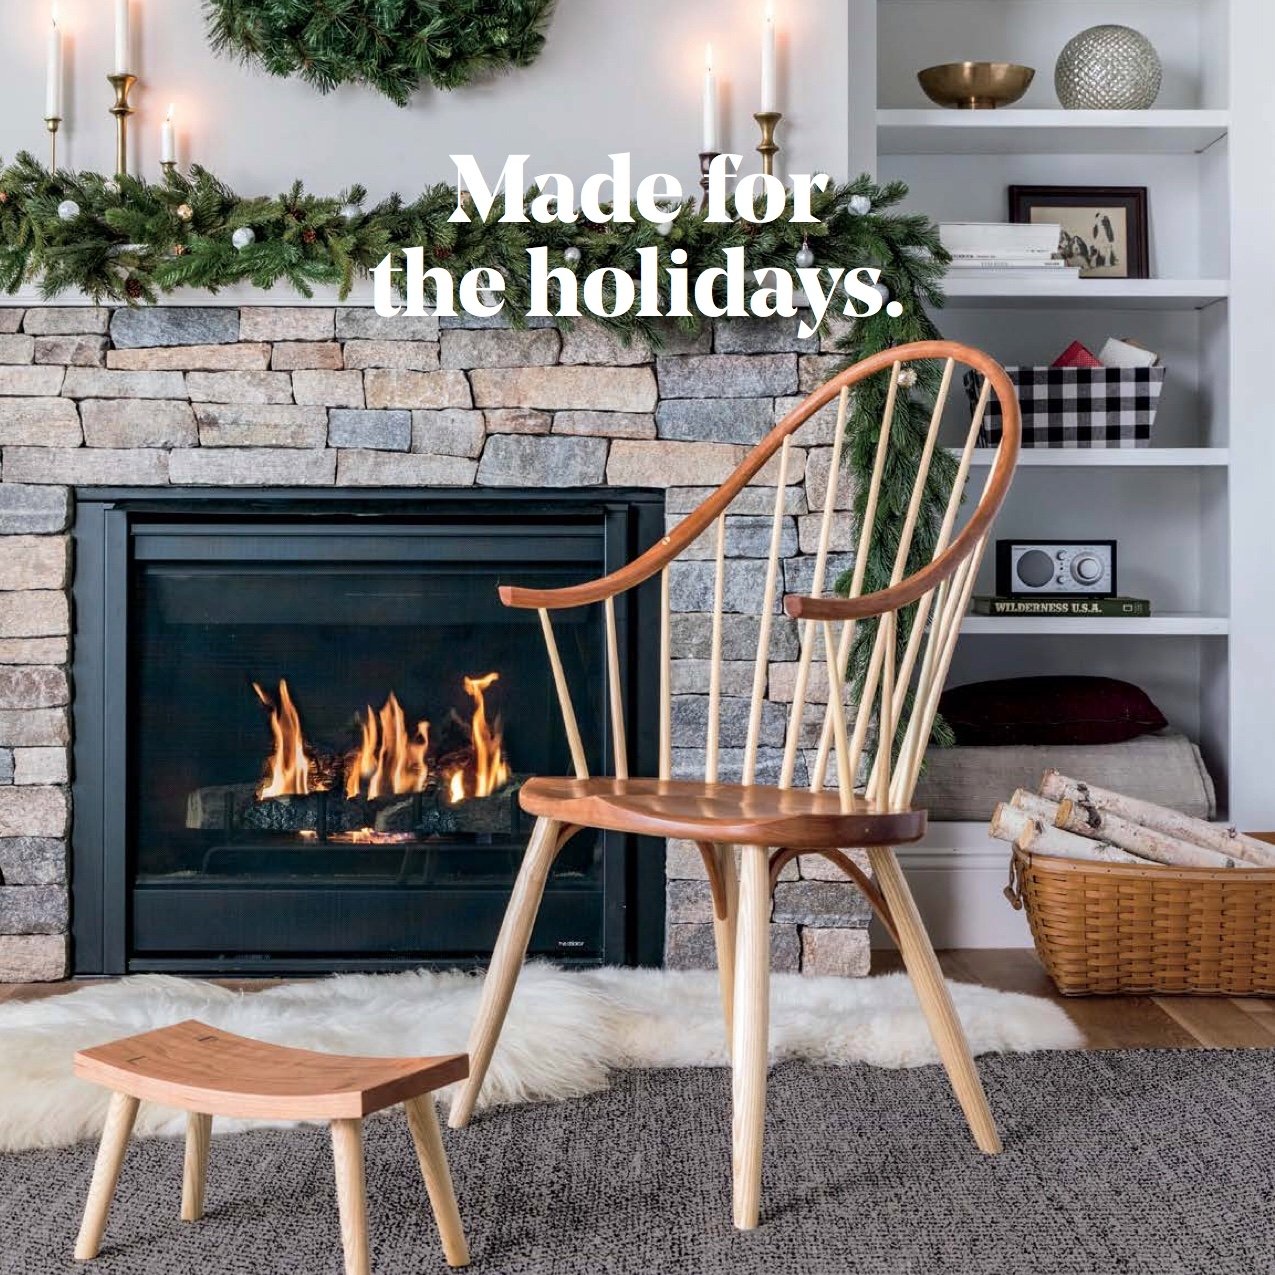 Erin Little Creates Imagery of High-End American-Made Furniture for Thos. Moser’s Winter Catalog